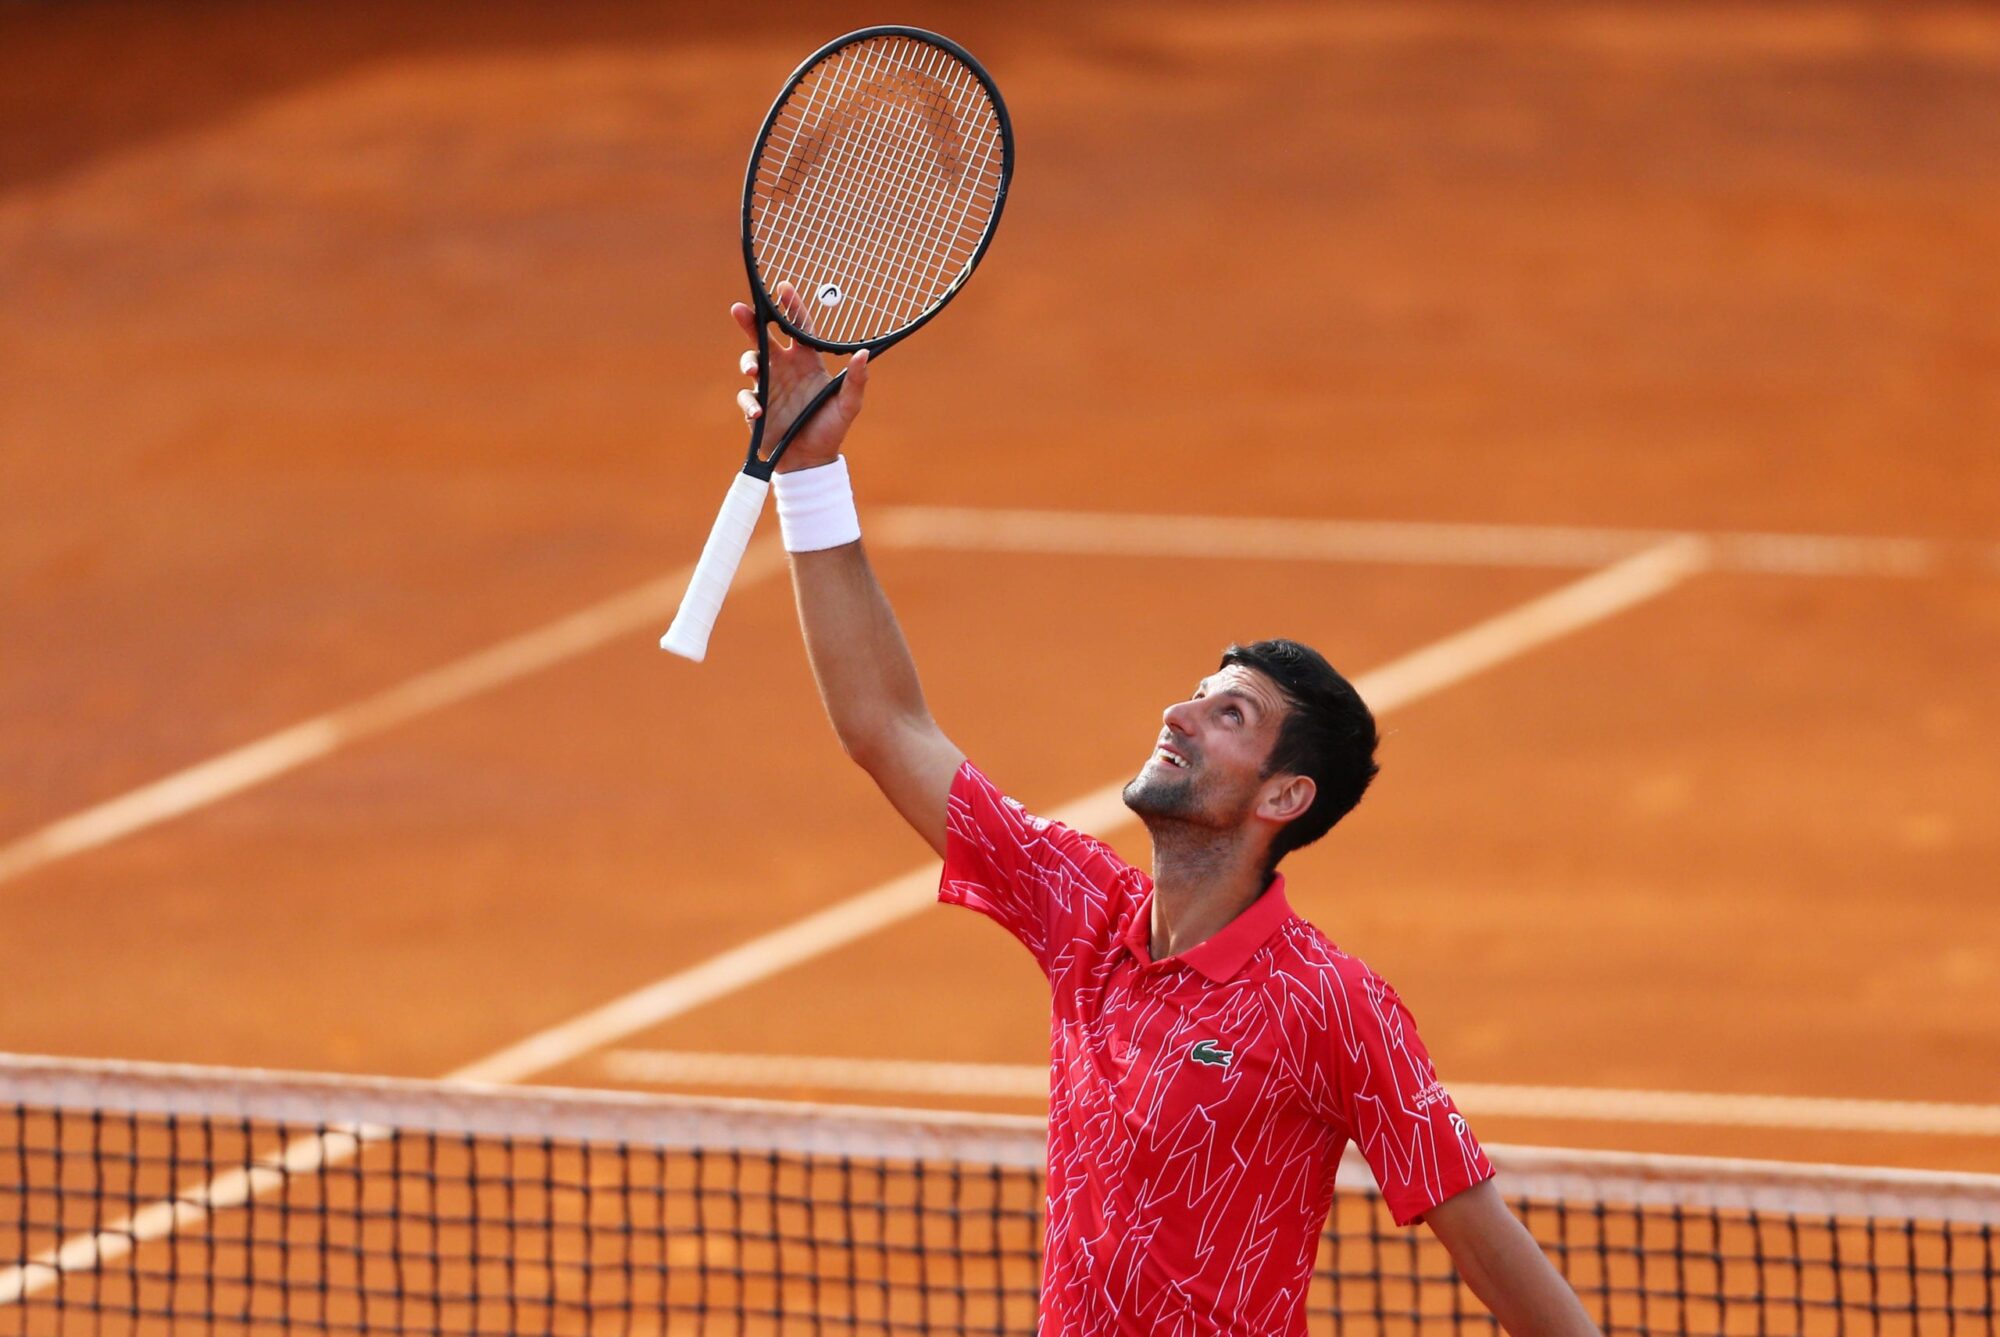 After being kicked out of Australia, Novak Djokovic is confirmed to play in Dubai Tennis Championships